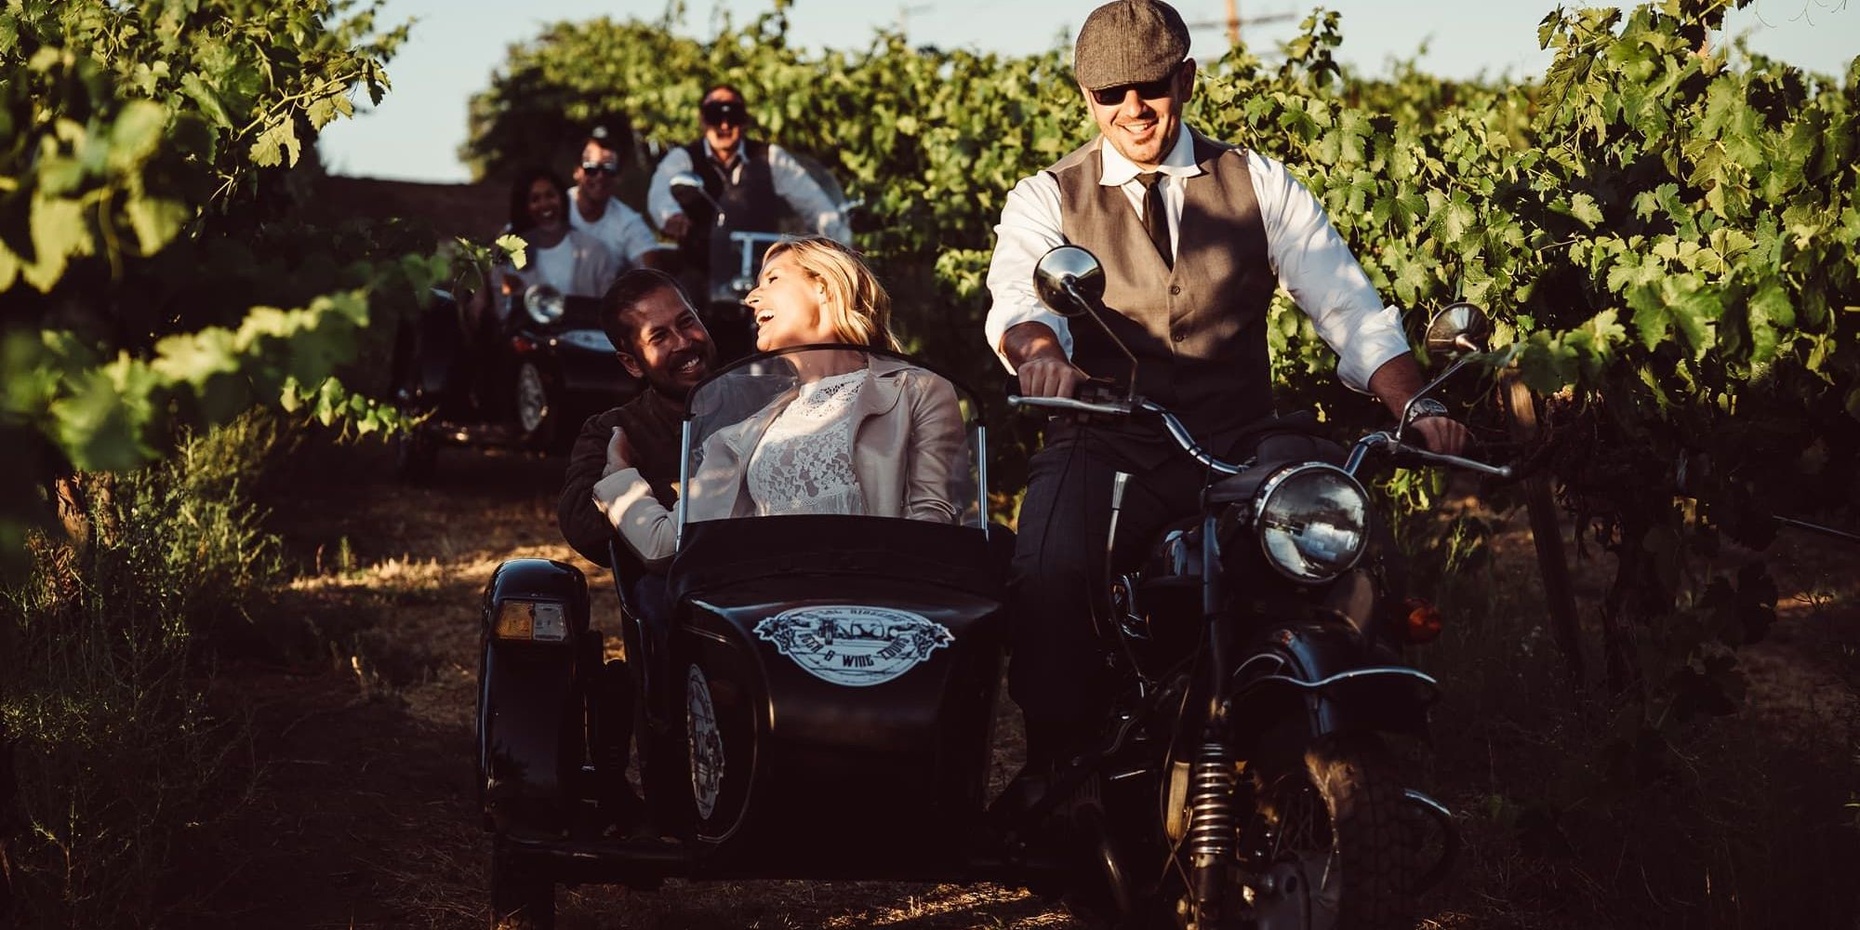 Sidecar Tour of Temecula's Wine Country